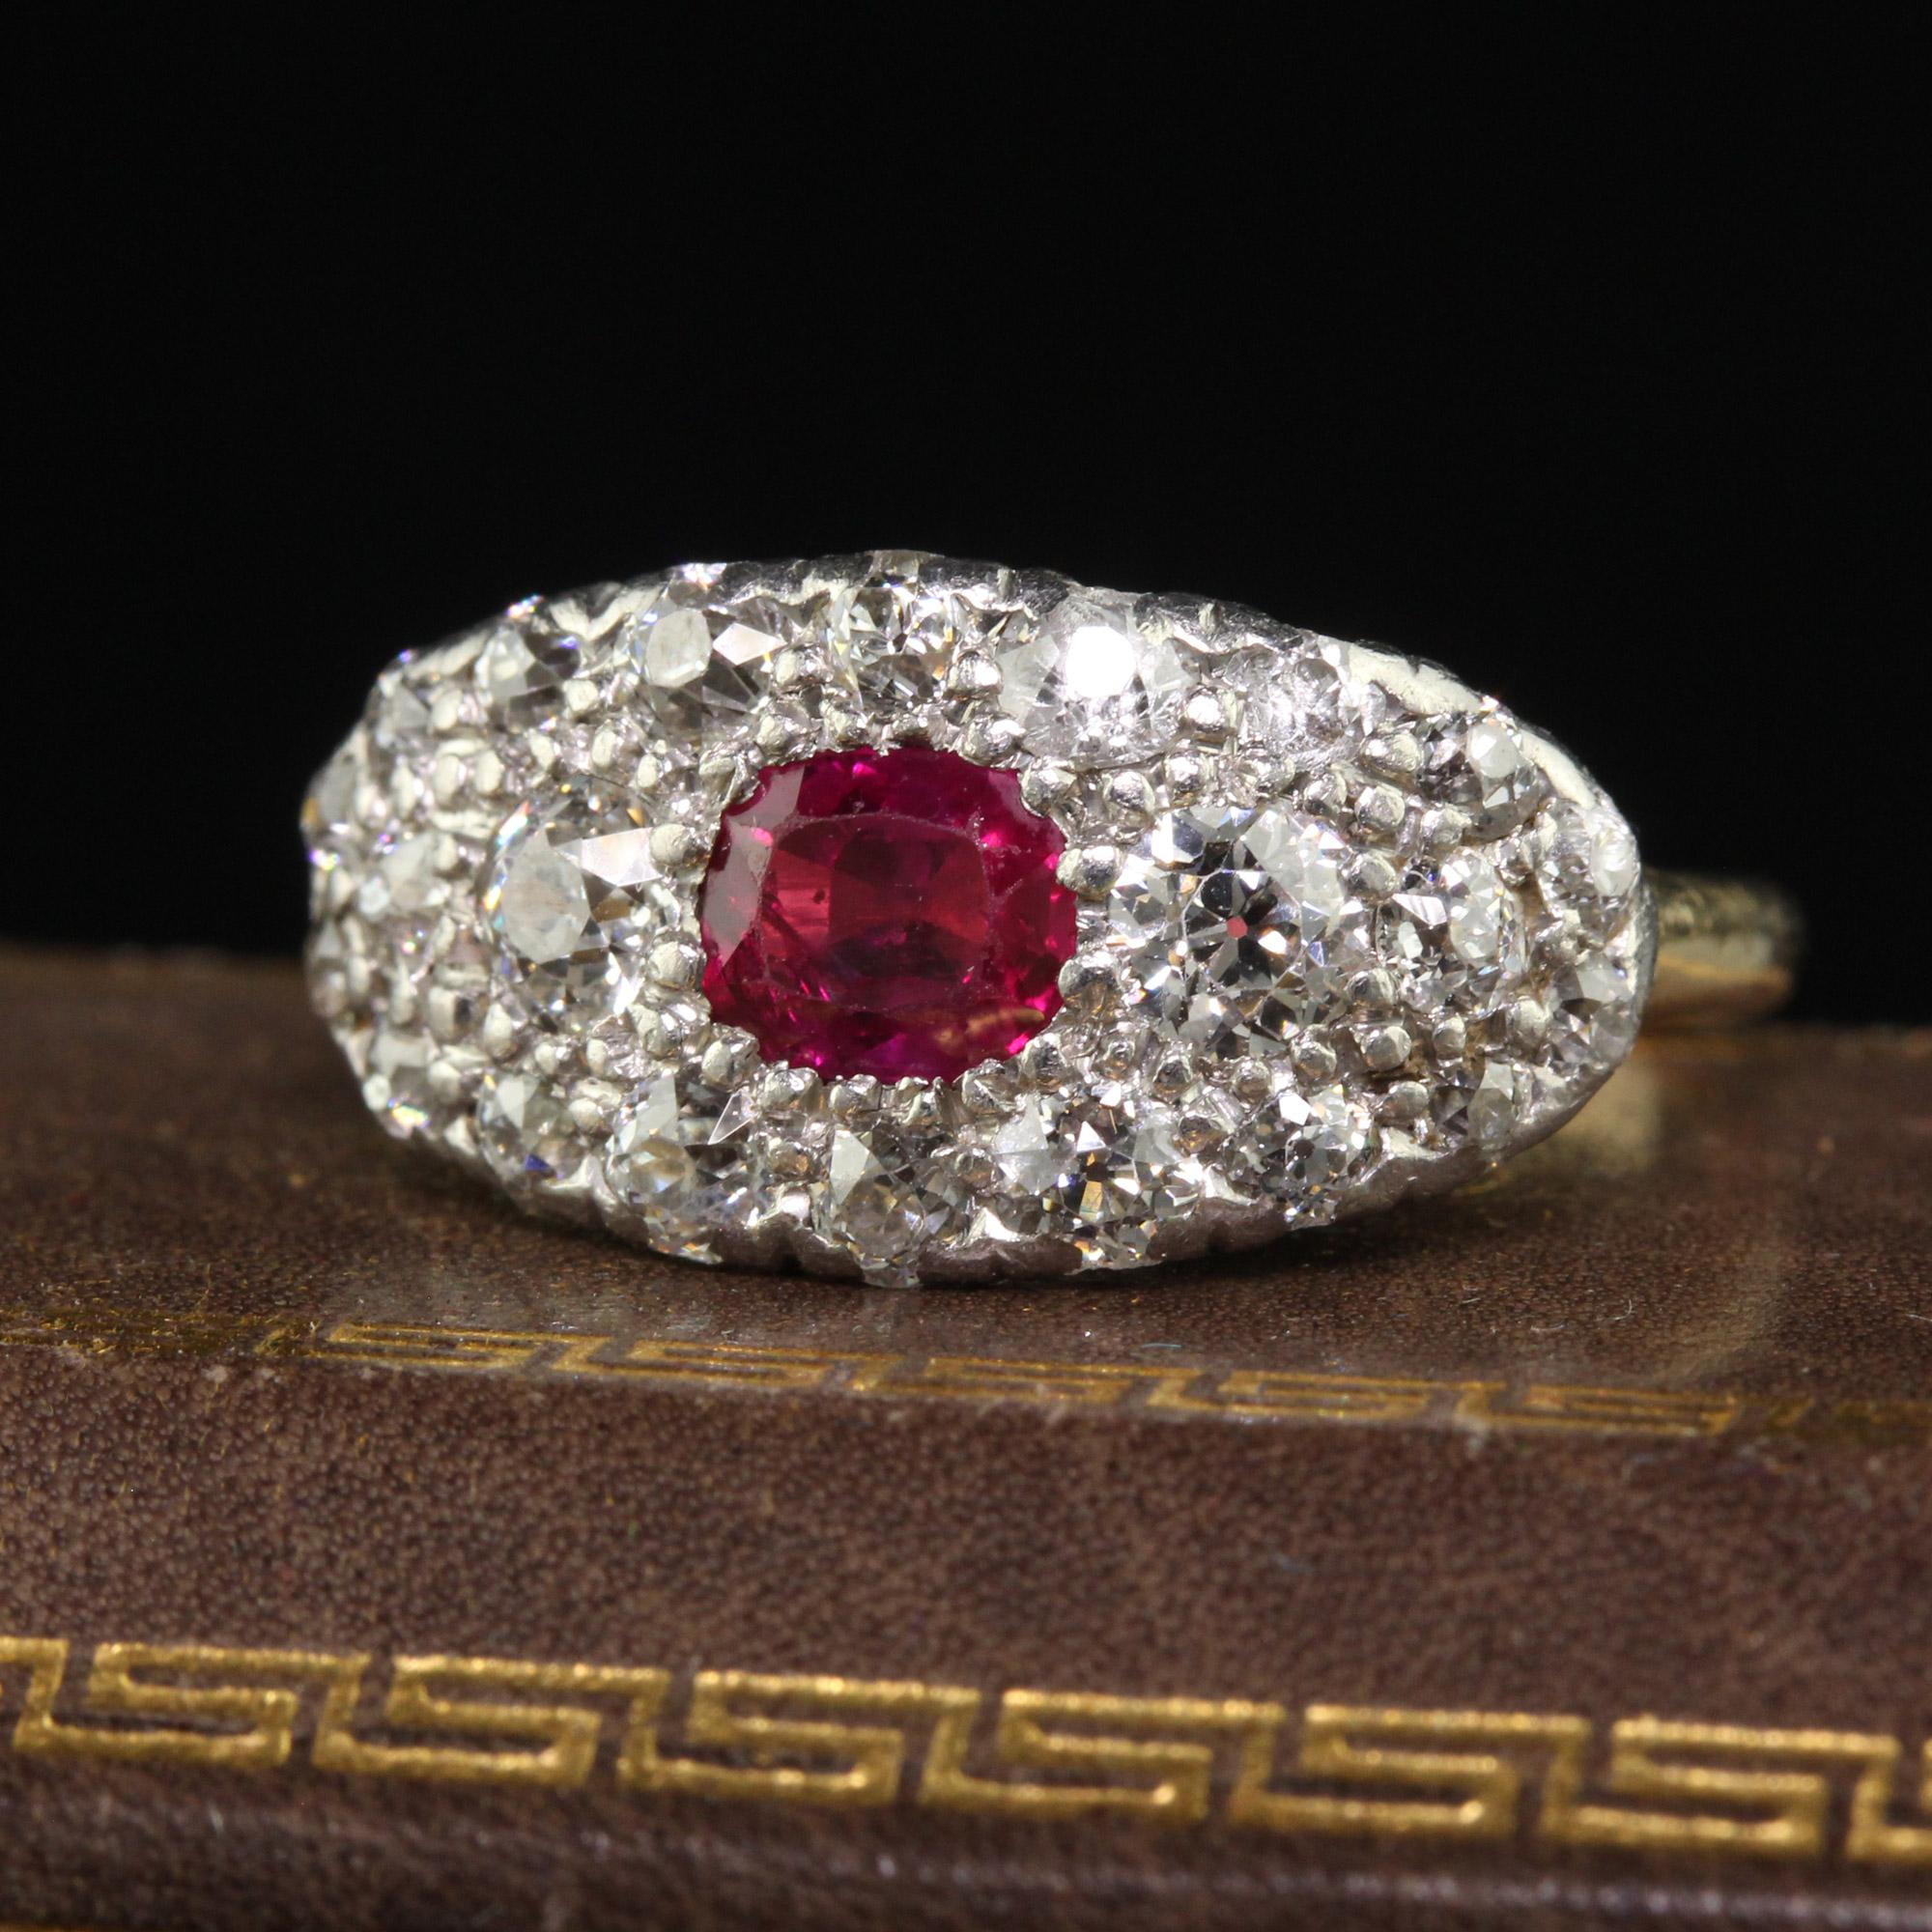 Beautiful Antique Art Deco 14K Yellow Gold Platinum Old Mine Diamond Burma Ruby Ring. This gorgeous saddle ring is crafted in 14k yellow gold and platinum. The center holds a natural Burmese ruby that appears to be untreated and is surrounded by old